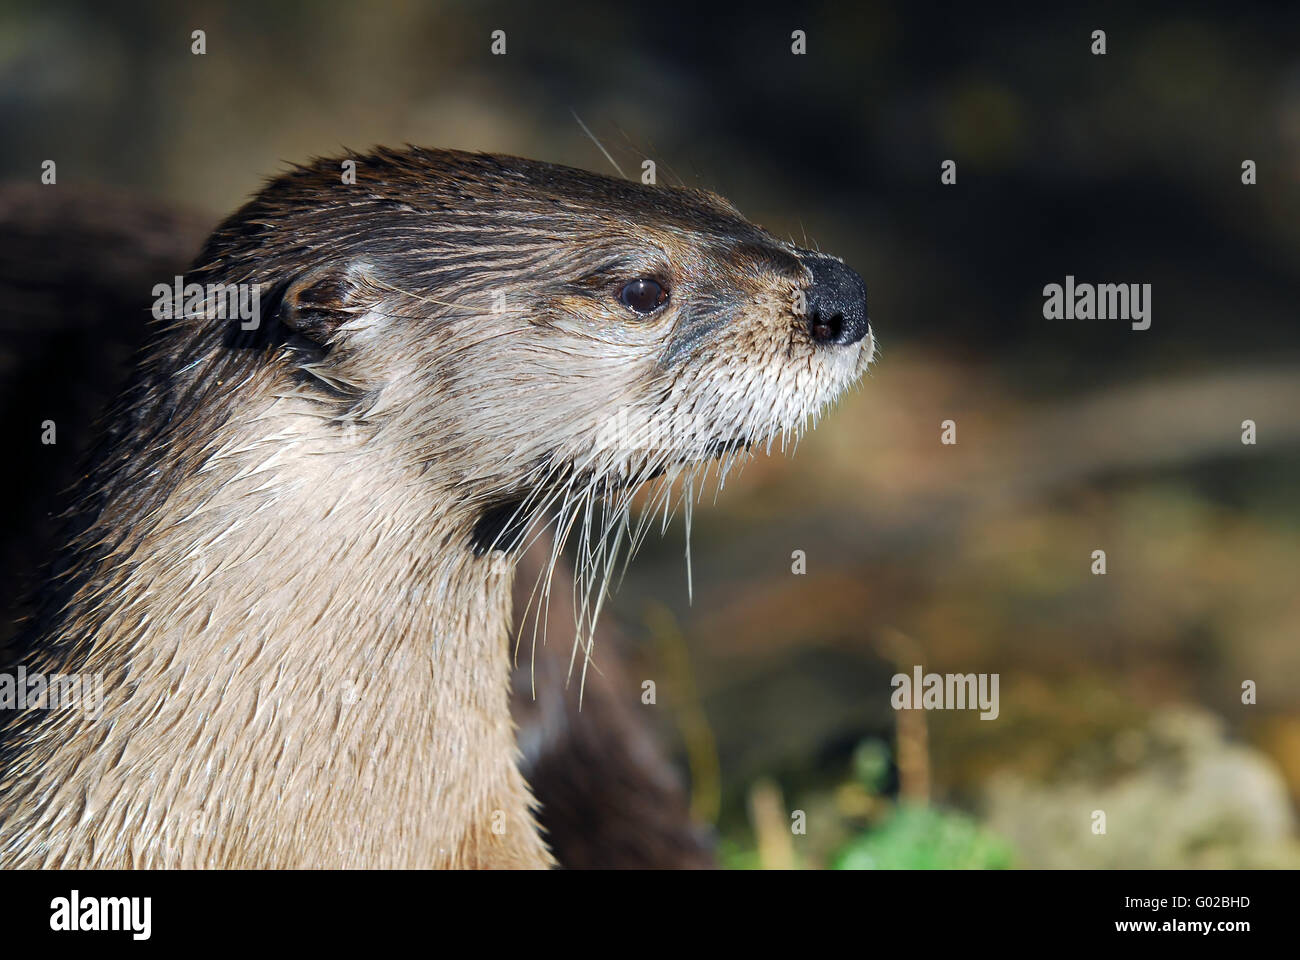 Close-up portrait of a wet Northern River Otter Stock Photo